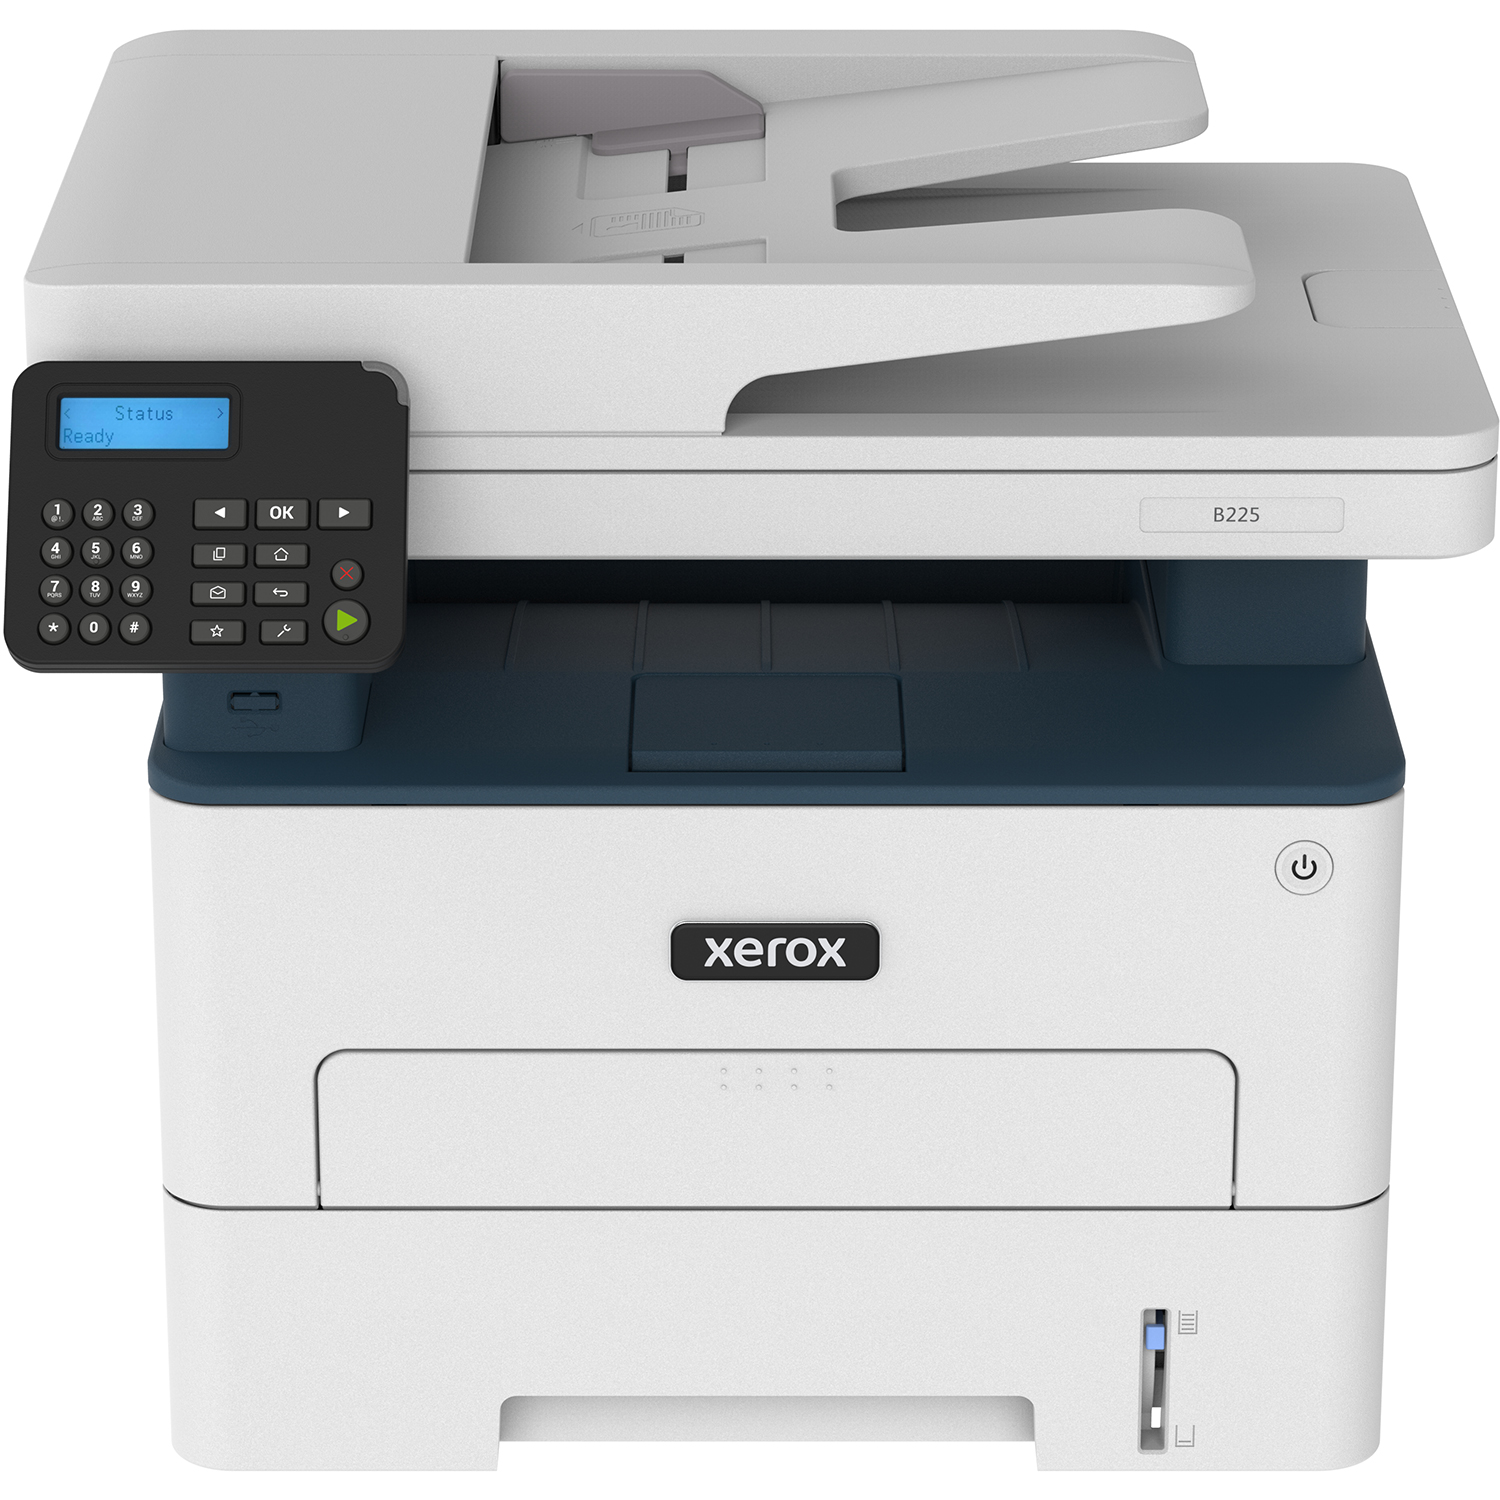 What Are Laser Printers Being Used For Today?